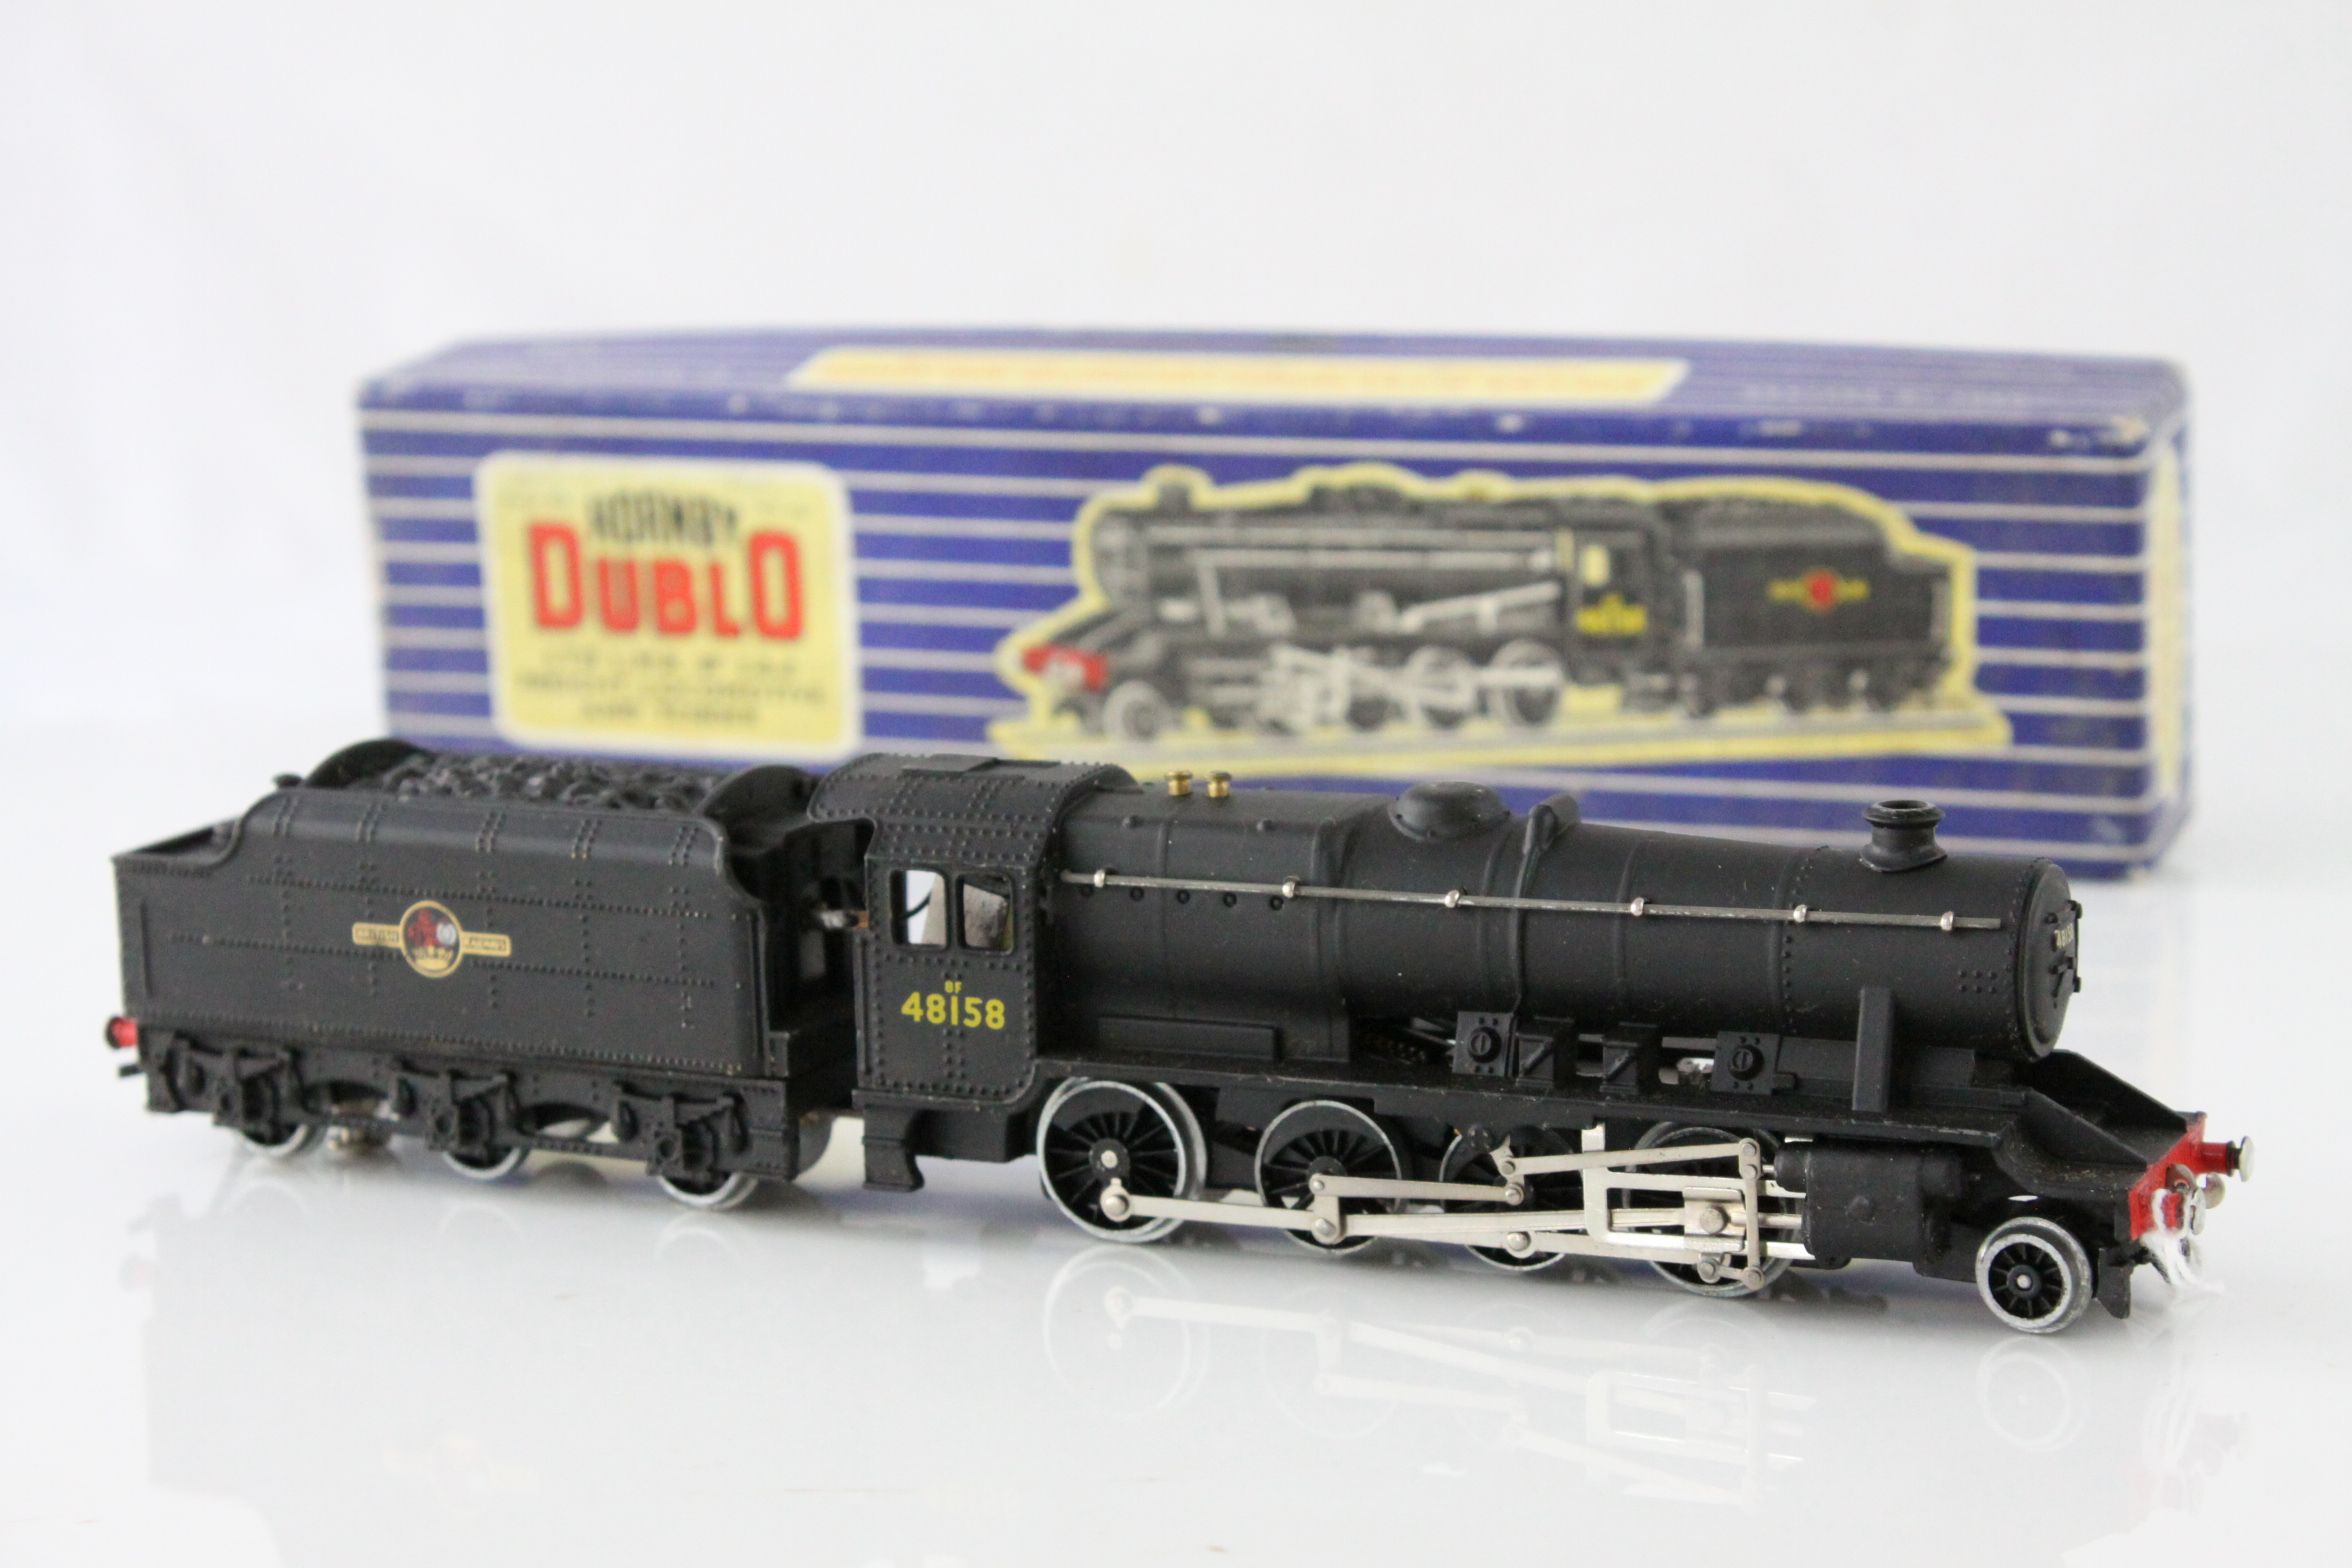 Boxed Hornby Dublo LT25 LMR 8F 2-8-0 Freight Locomotive and Tender, appearing in vg condition, split